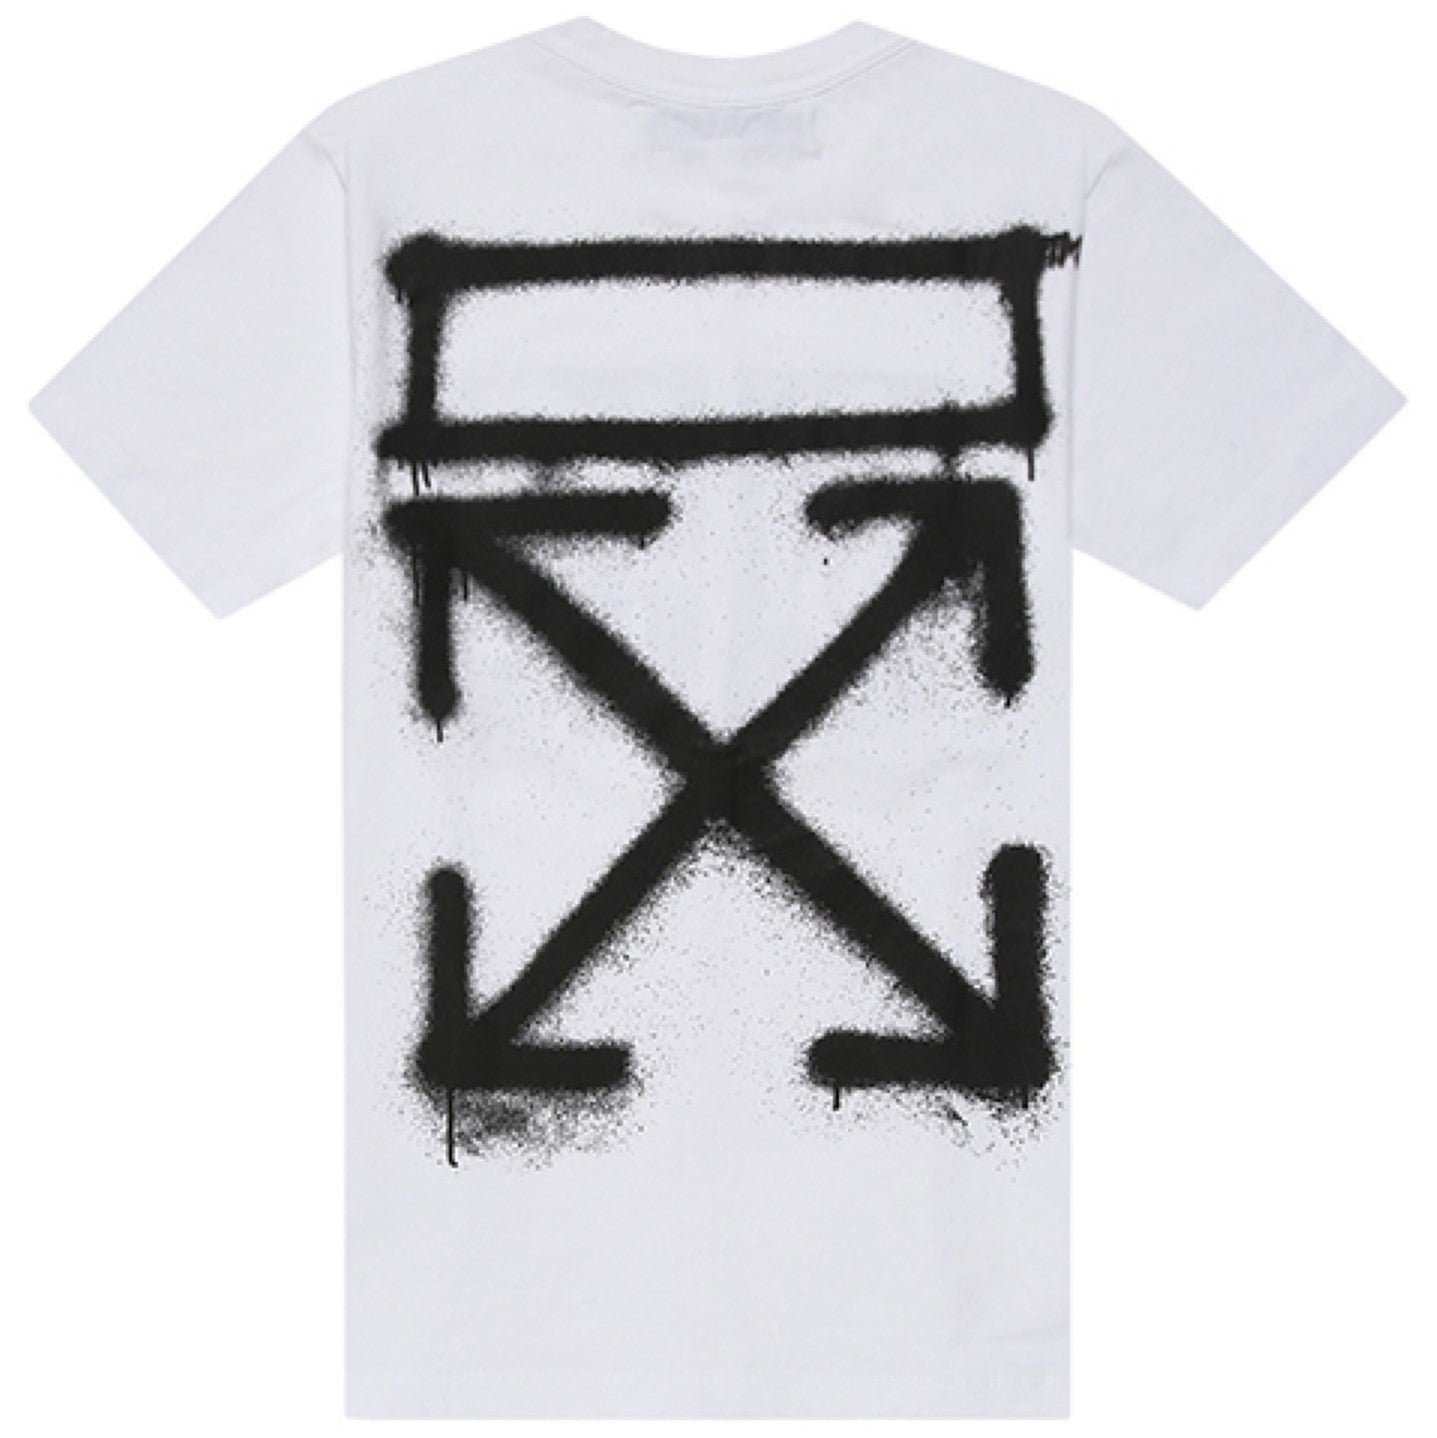 Off-White Spray Painting S/S Over Tee